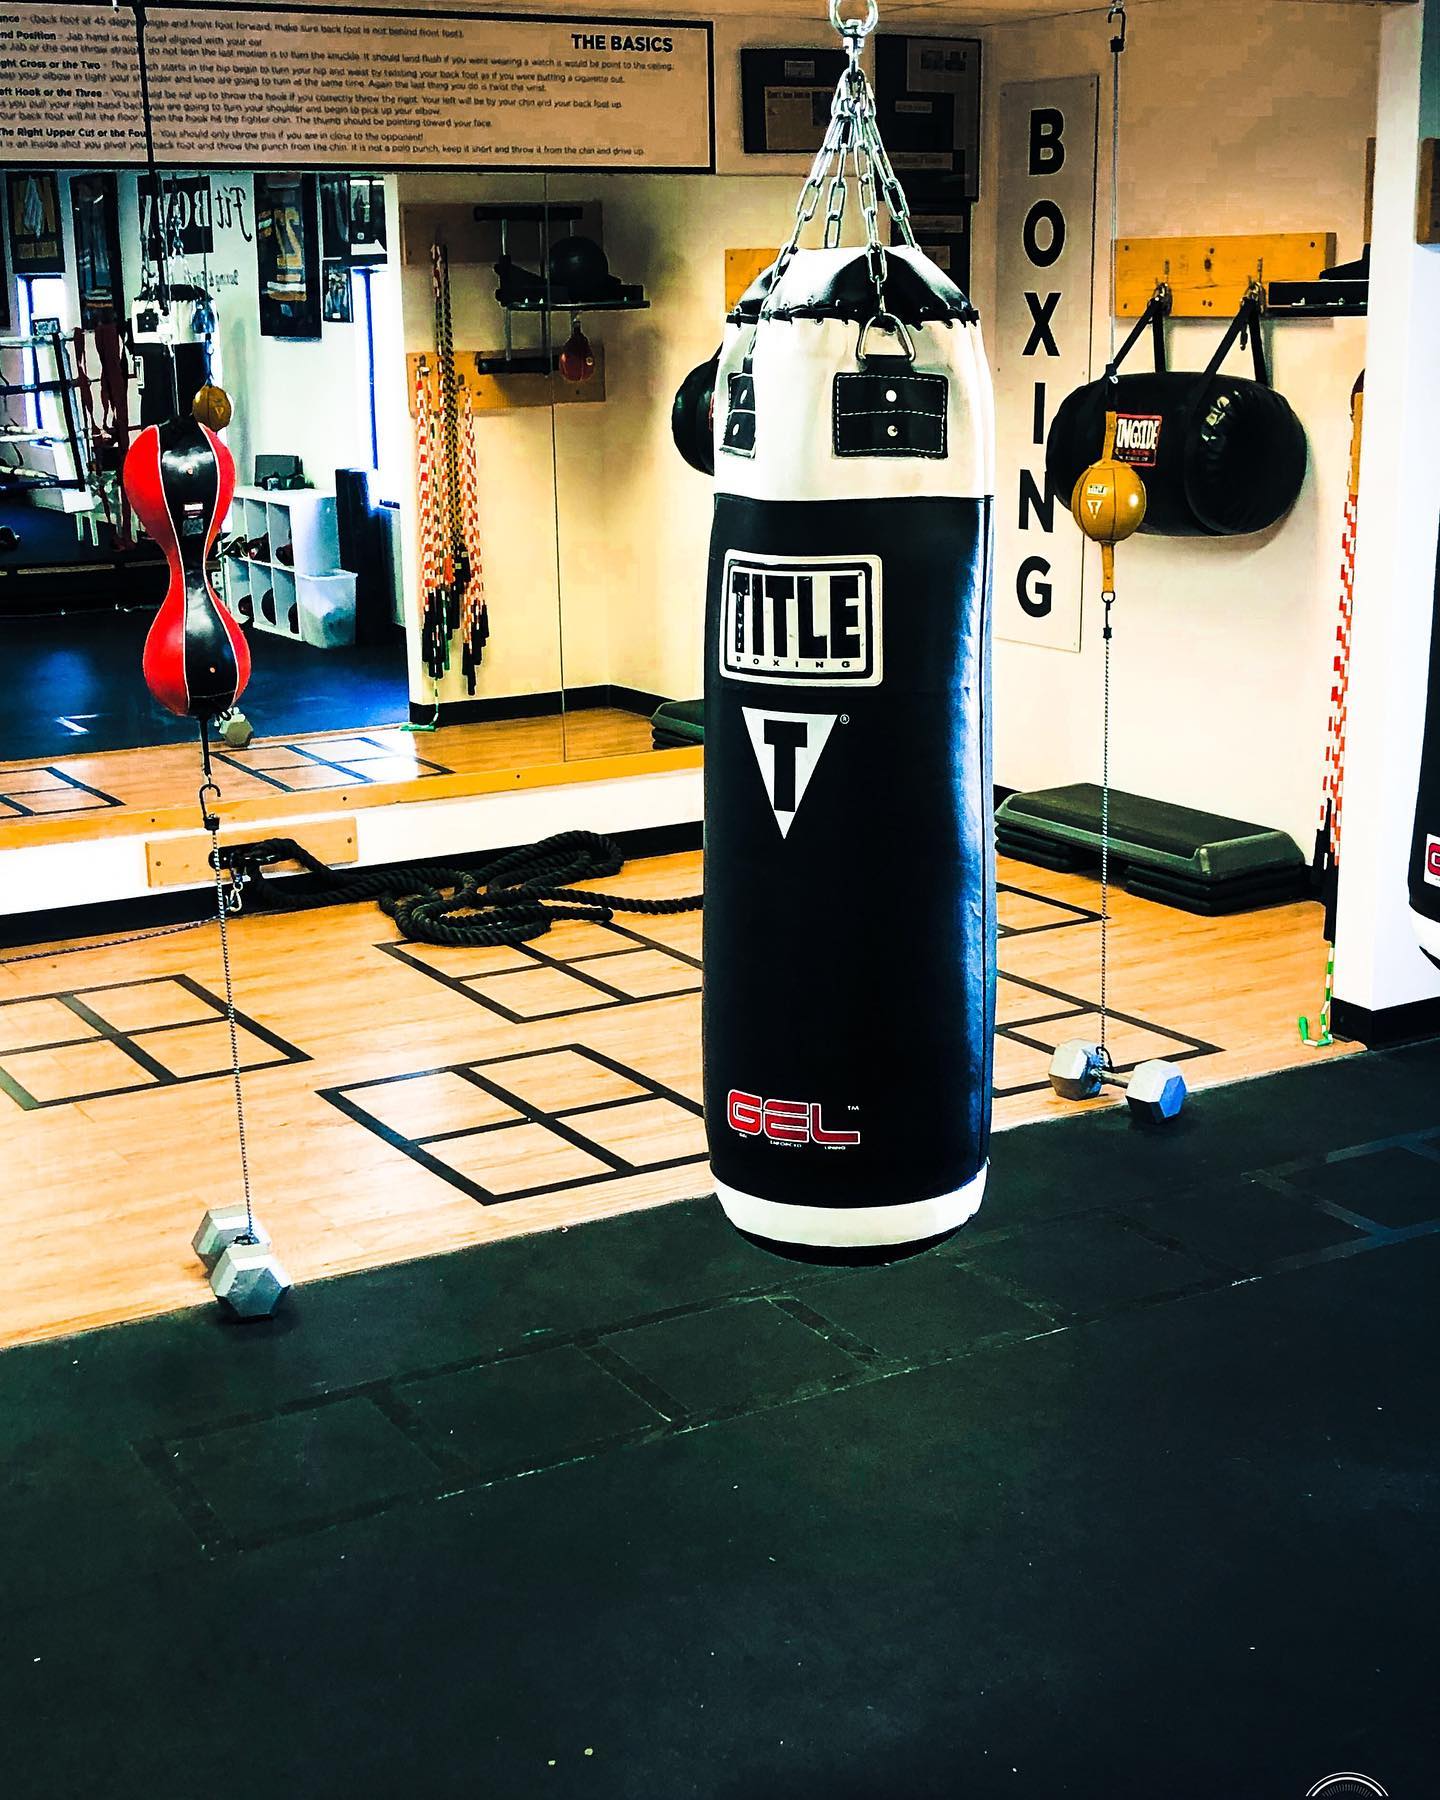 Boxing Studio in Dedham,Ma . If you were always wanting to try a boxing workout and it’s your first time !! Contact us Today and we can schedule you in to come in for Free boxing workout.  Call/text (781)727-9503.
.
@instagram @tommymcinerney